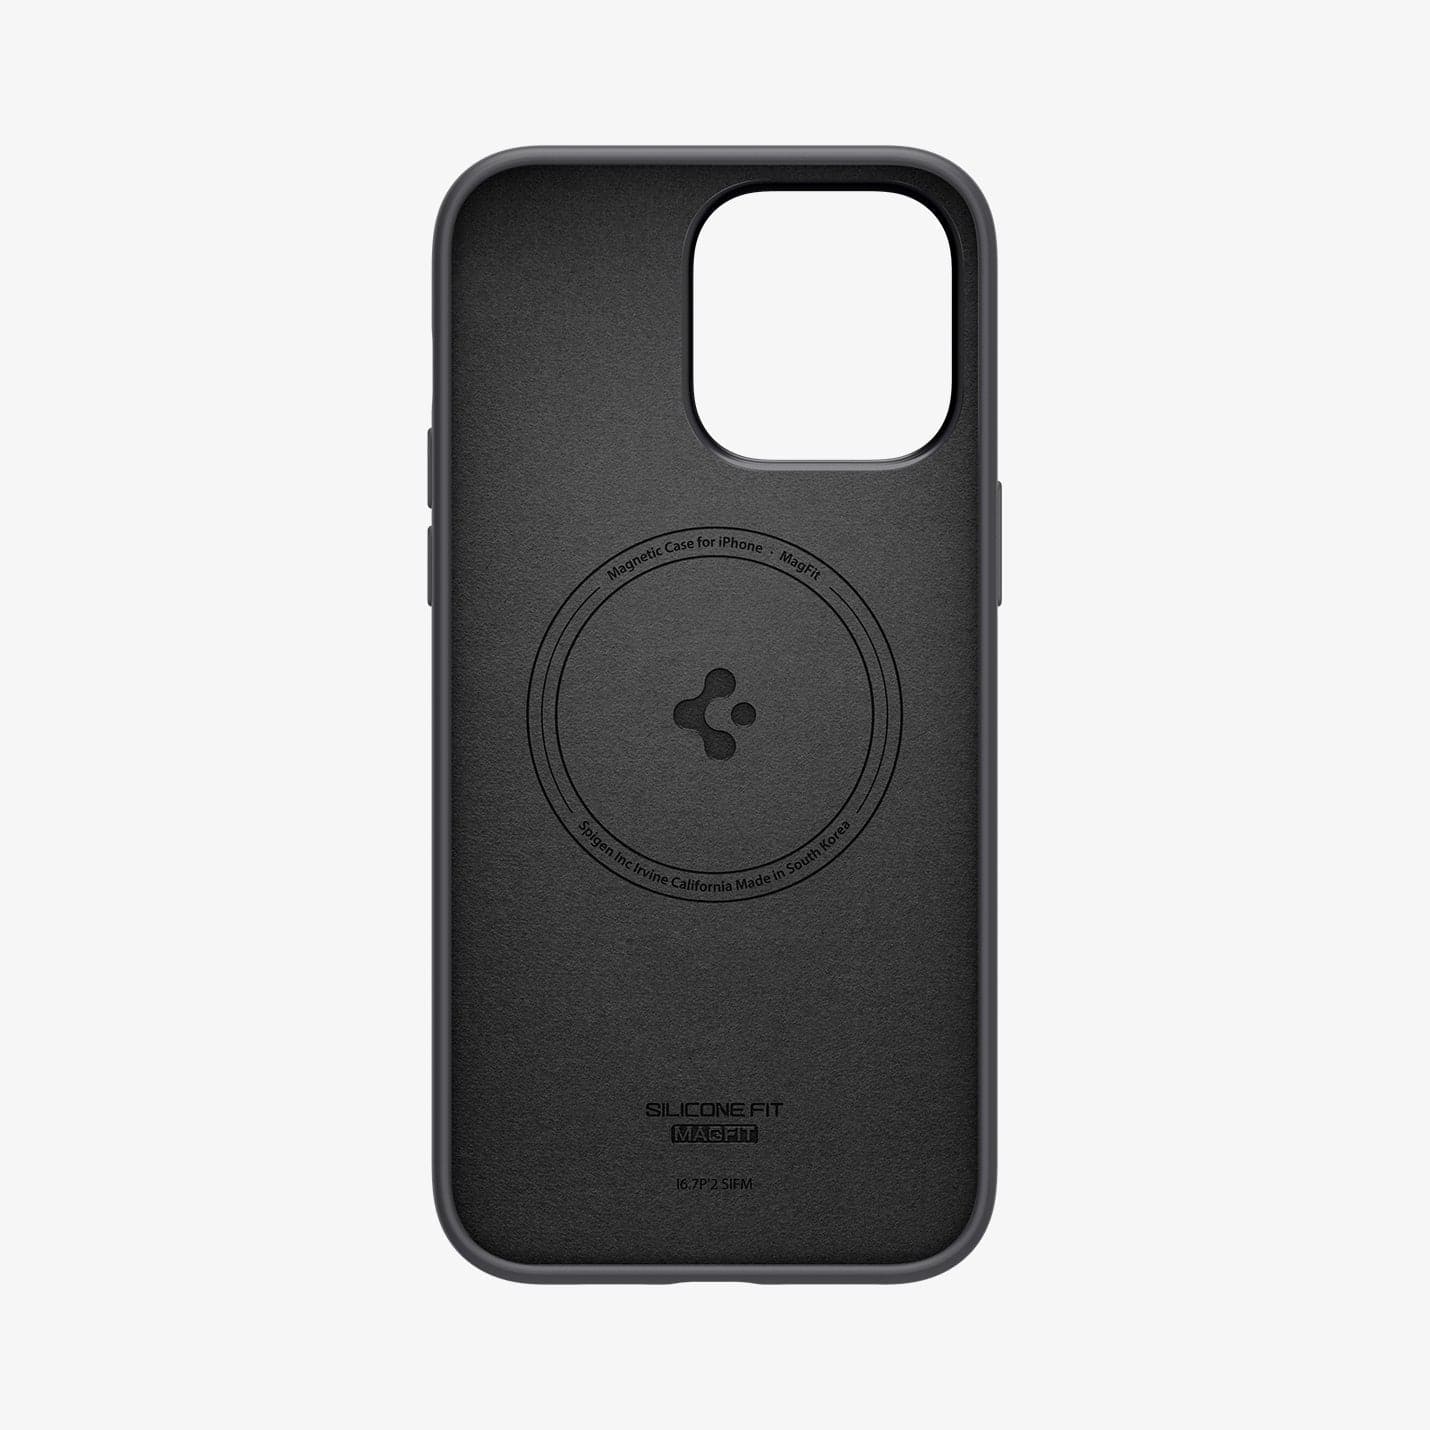 ACS04846 - iPhone 14 Pro Max Case Silicone Fit (MagFit) in black showing the inside of case